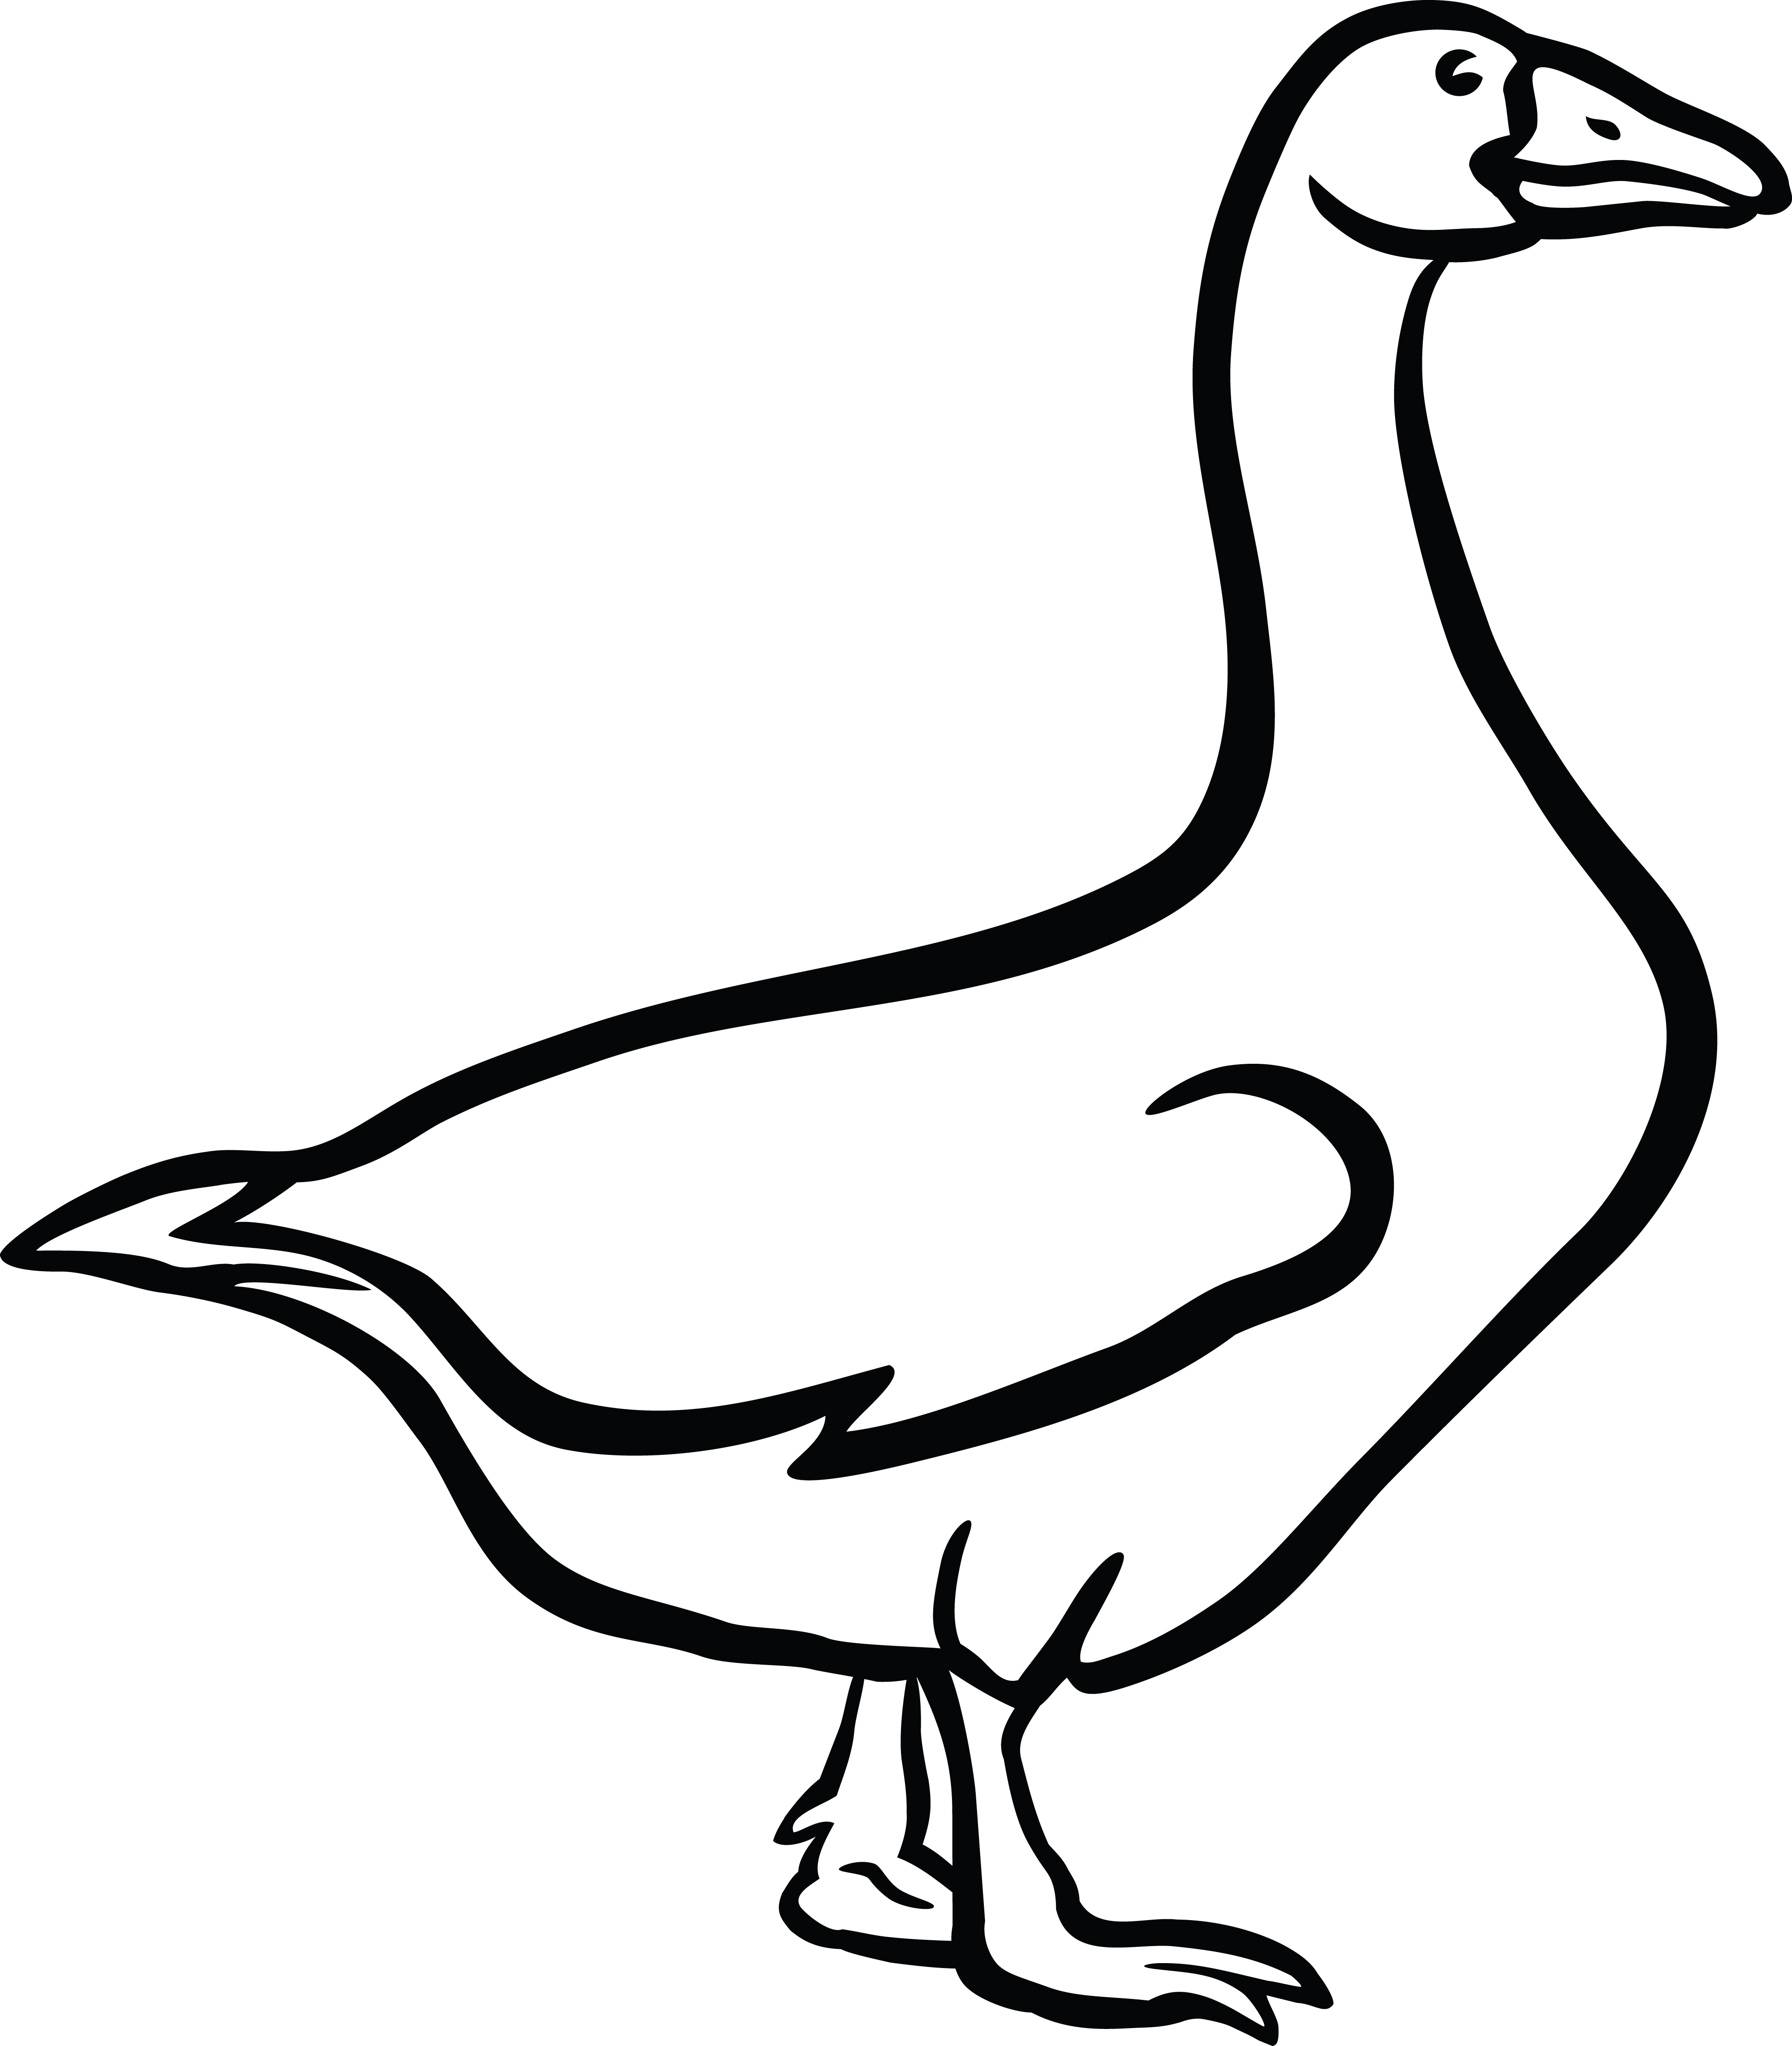 Free Clipart Of A Goose in black and white.